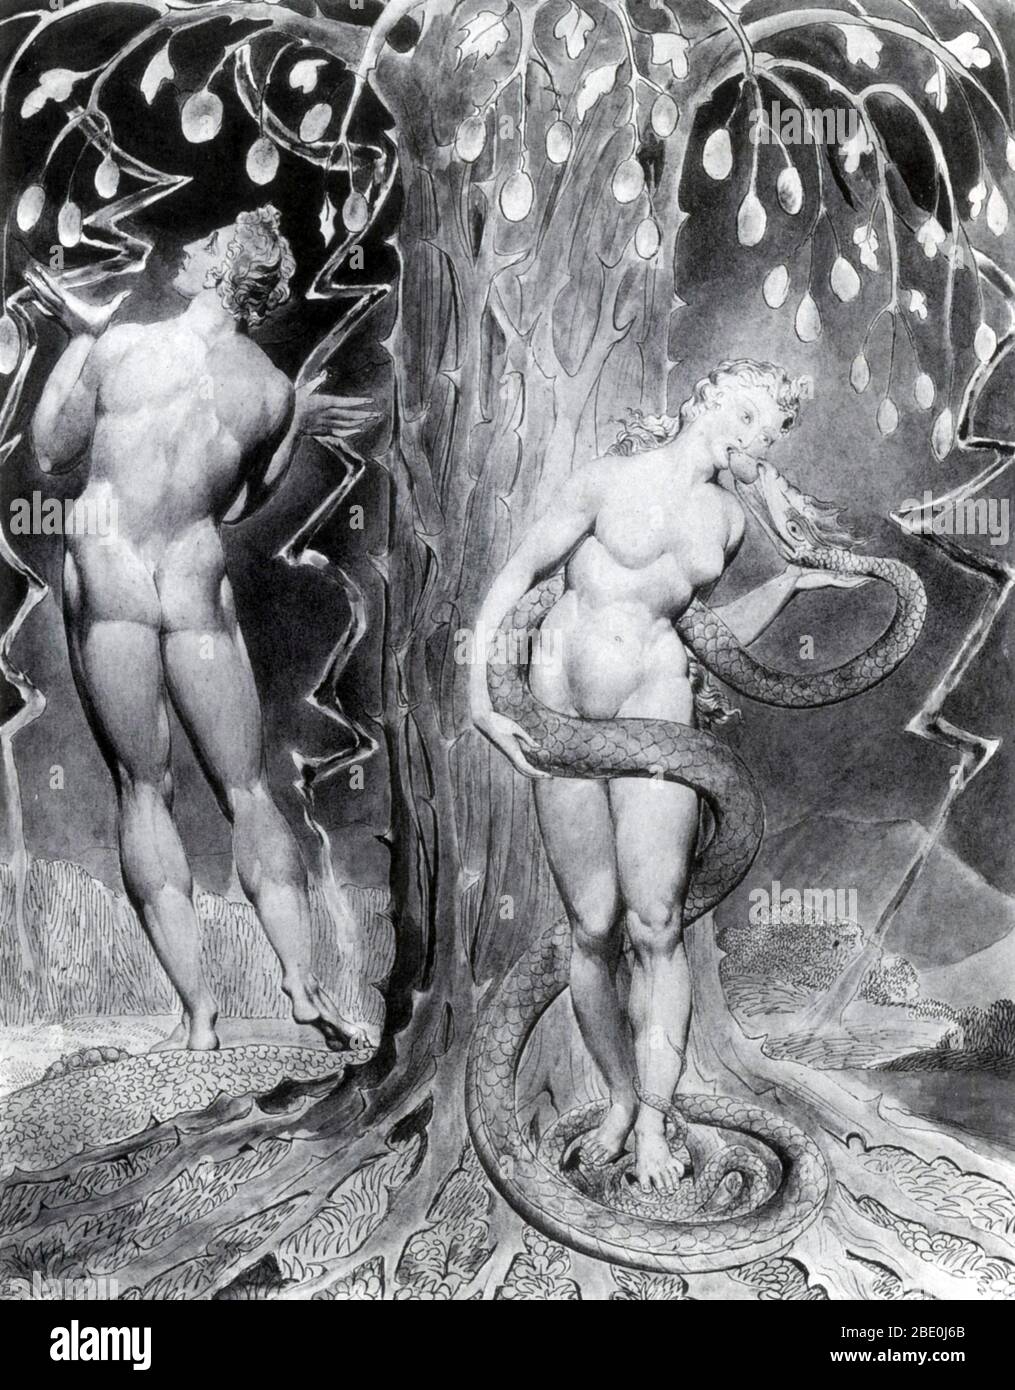 'The Temptation and Fall of Eve' illustrated by William Blake for an 1808 edition of Milton's for 'Paradise Lost'. Paradise Lost is an epic poem in blank verse by the English poet John Milton (December 9, 1608 - November 8, 1674). The poem concerns the Biblical story of the Fall of Man: the temptation of Adam and Eve by the fallen angel Satan and their expulsion from the Garden of Eden. Milton's purpose, stated in Book I, is to 'justify the ways of God to men'. William Blake (November 28, 1757 - August 12, 1827) was an English poet, painter, and printmaker. Largely unrecognized during his life Stock Photo